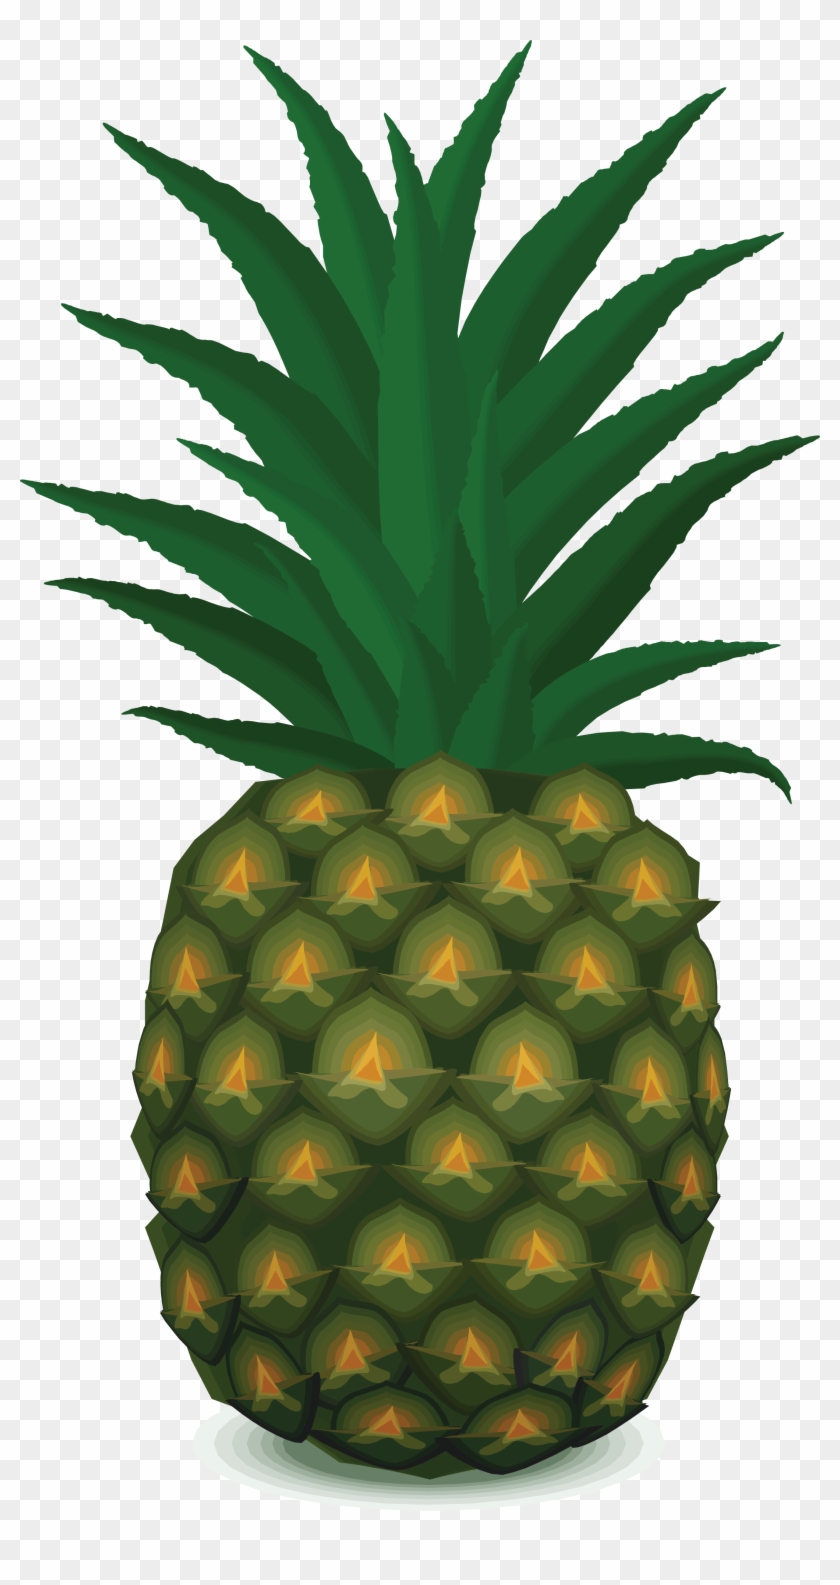 Pineapple Png Images Free Pictures Download Pineapple - Ананас Пнг #549422